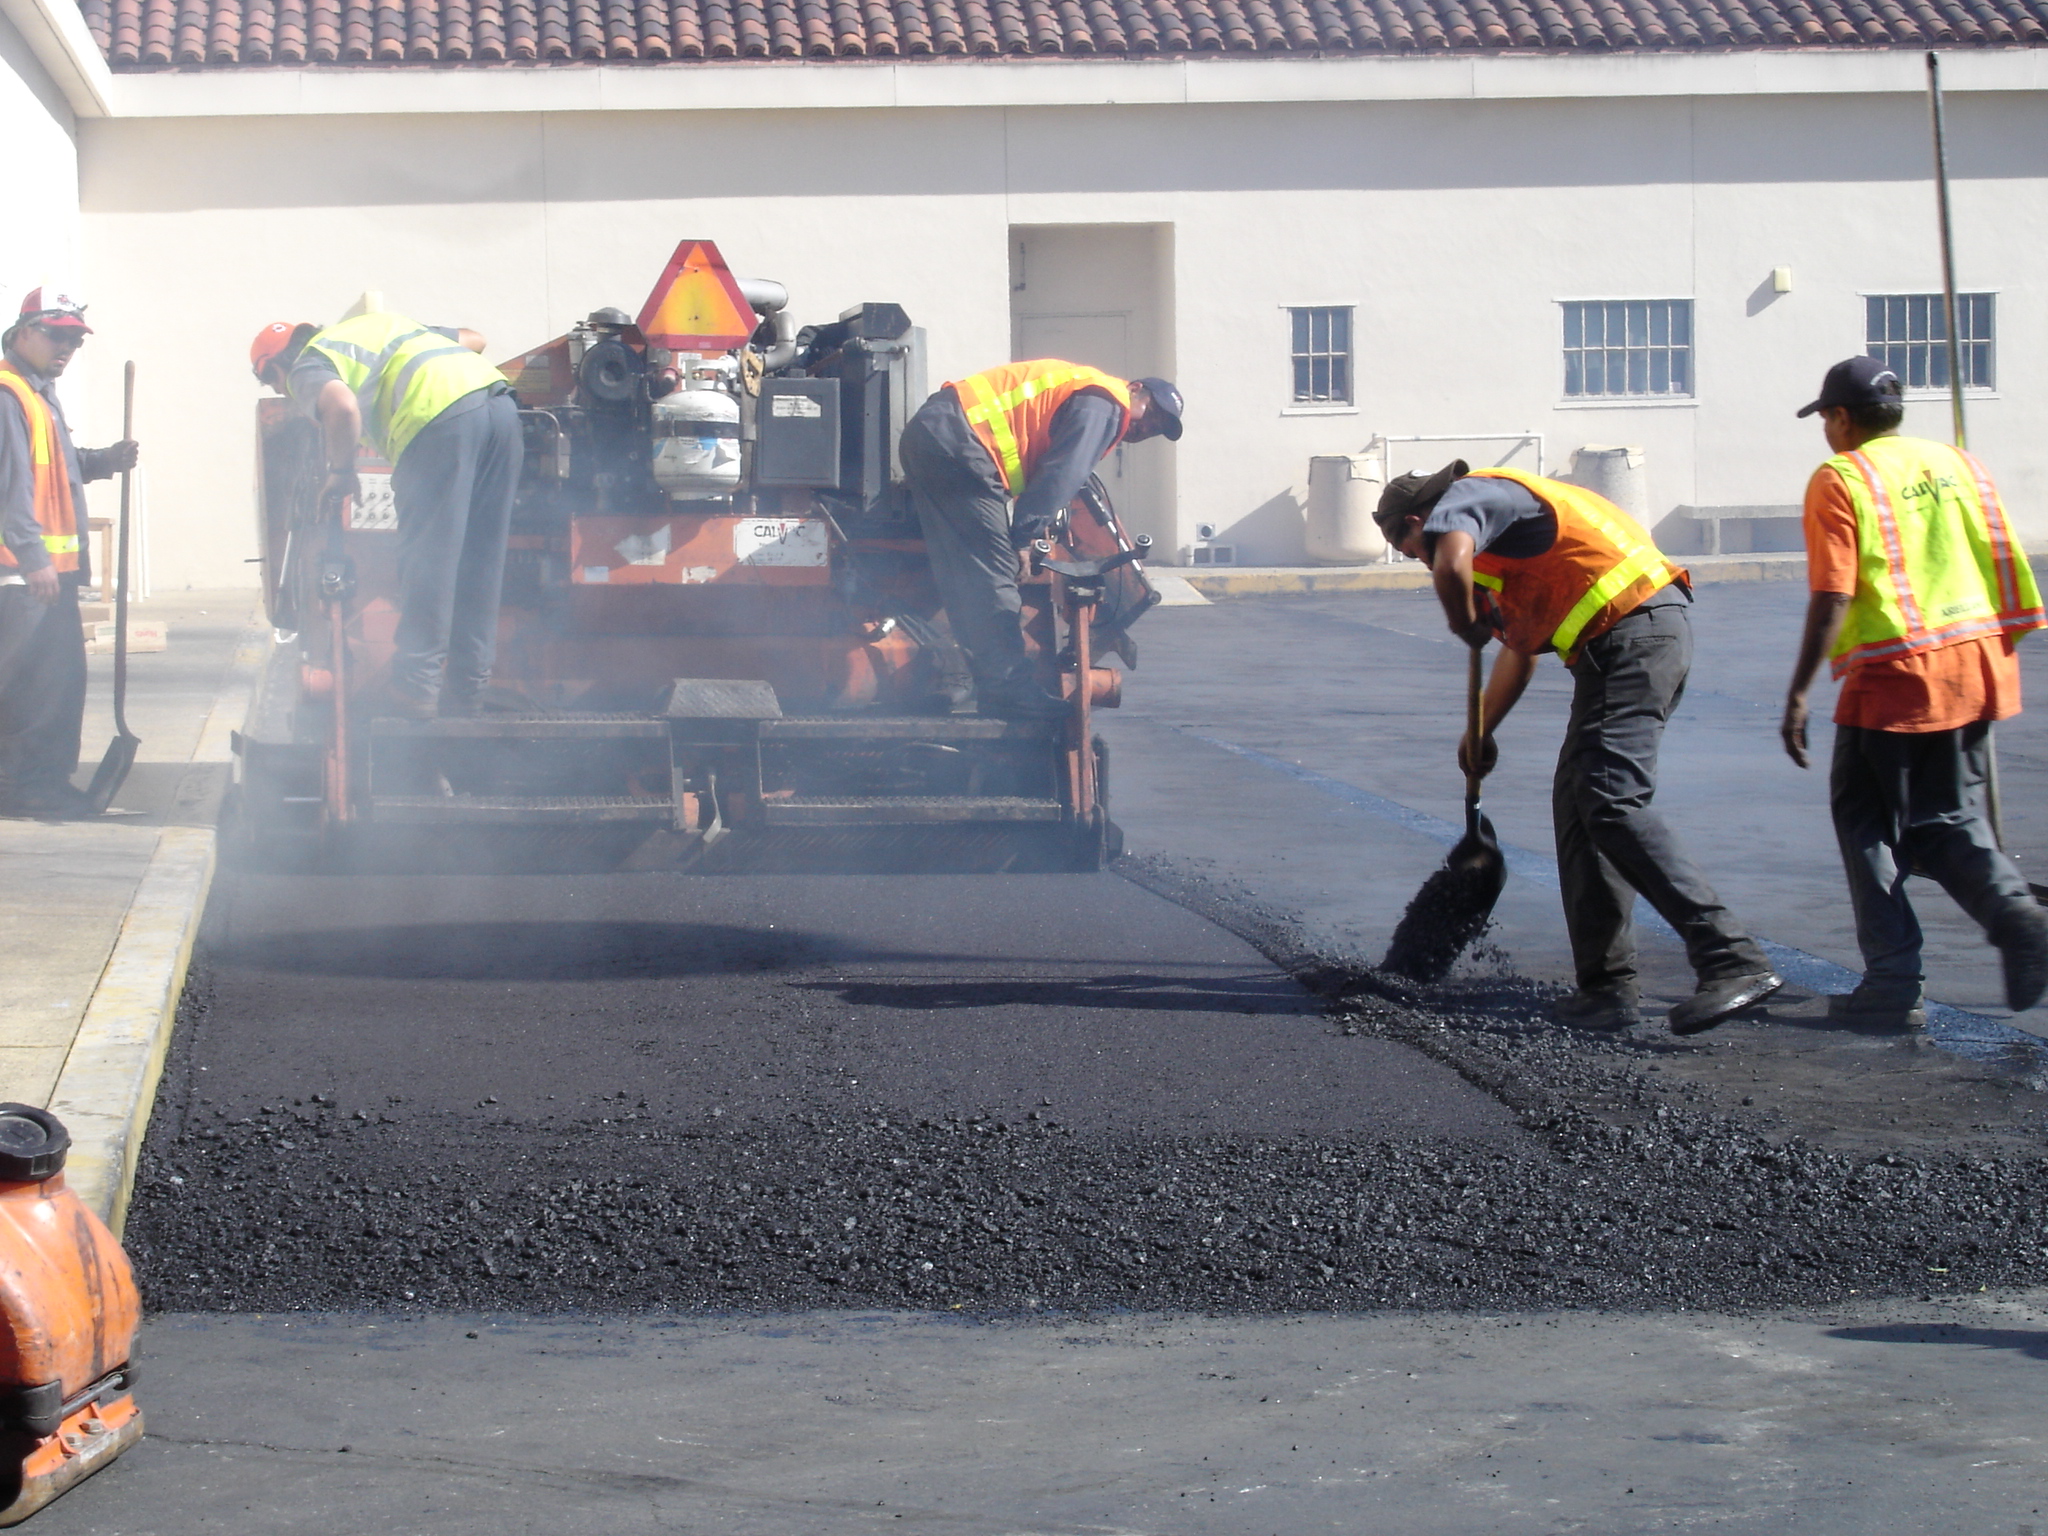 Asphalt Recycling: How is Asphalt Paving Recycled? - American